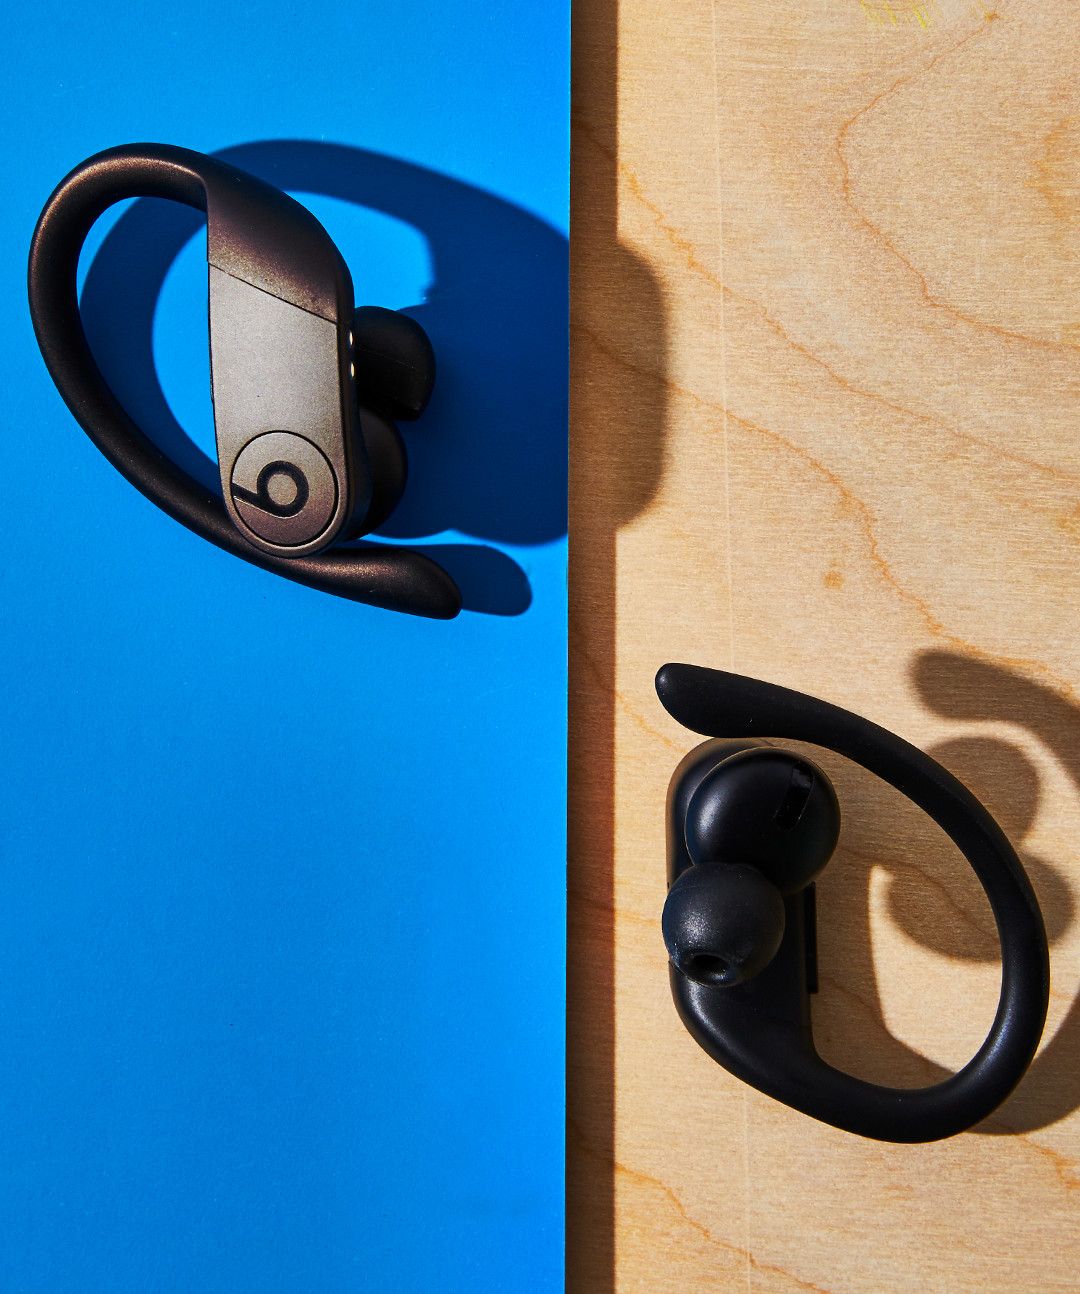 magic beats pro wireless earbuds review